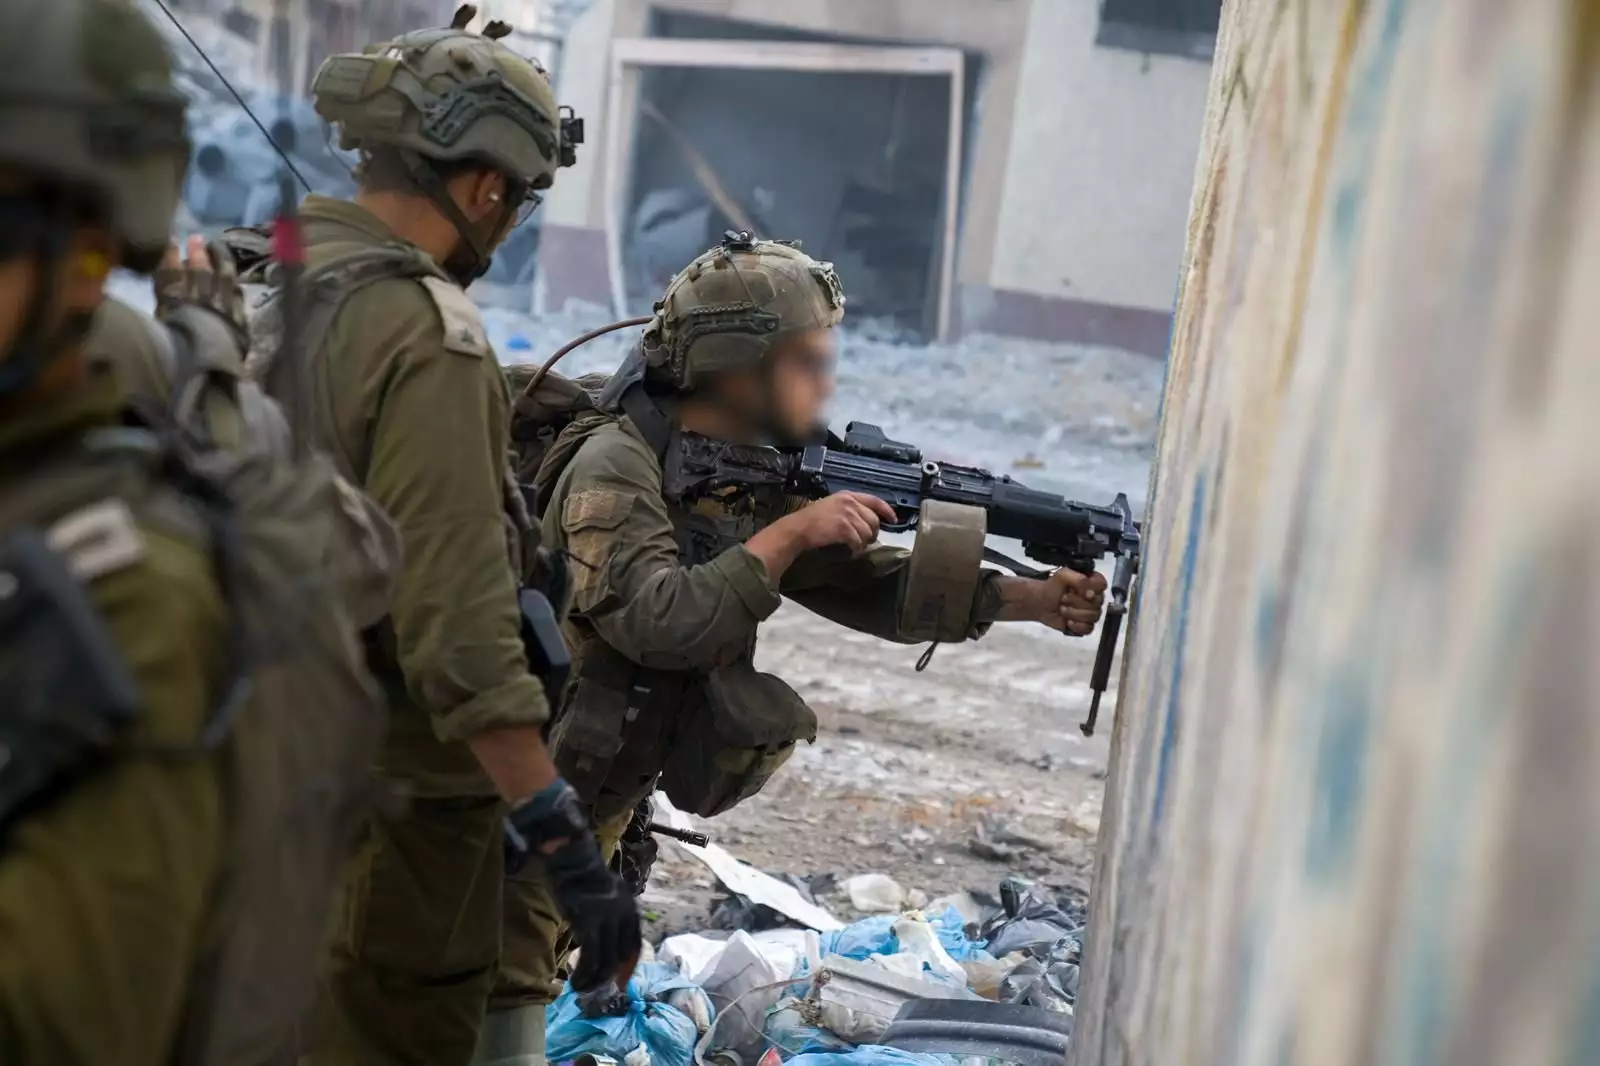 The results of the investigation of the wrong killing incident in the Israeli Army： This can be avoided but disposed of correctly broadcasting articles